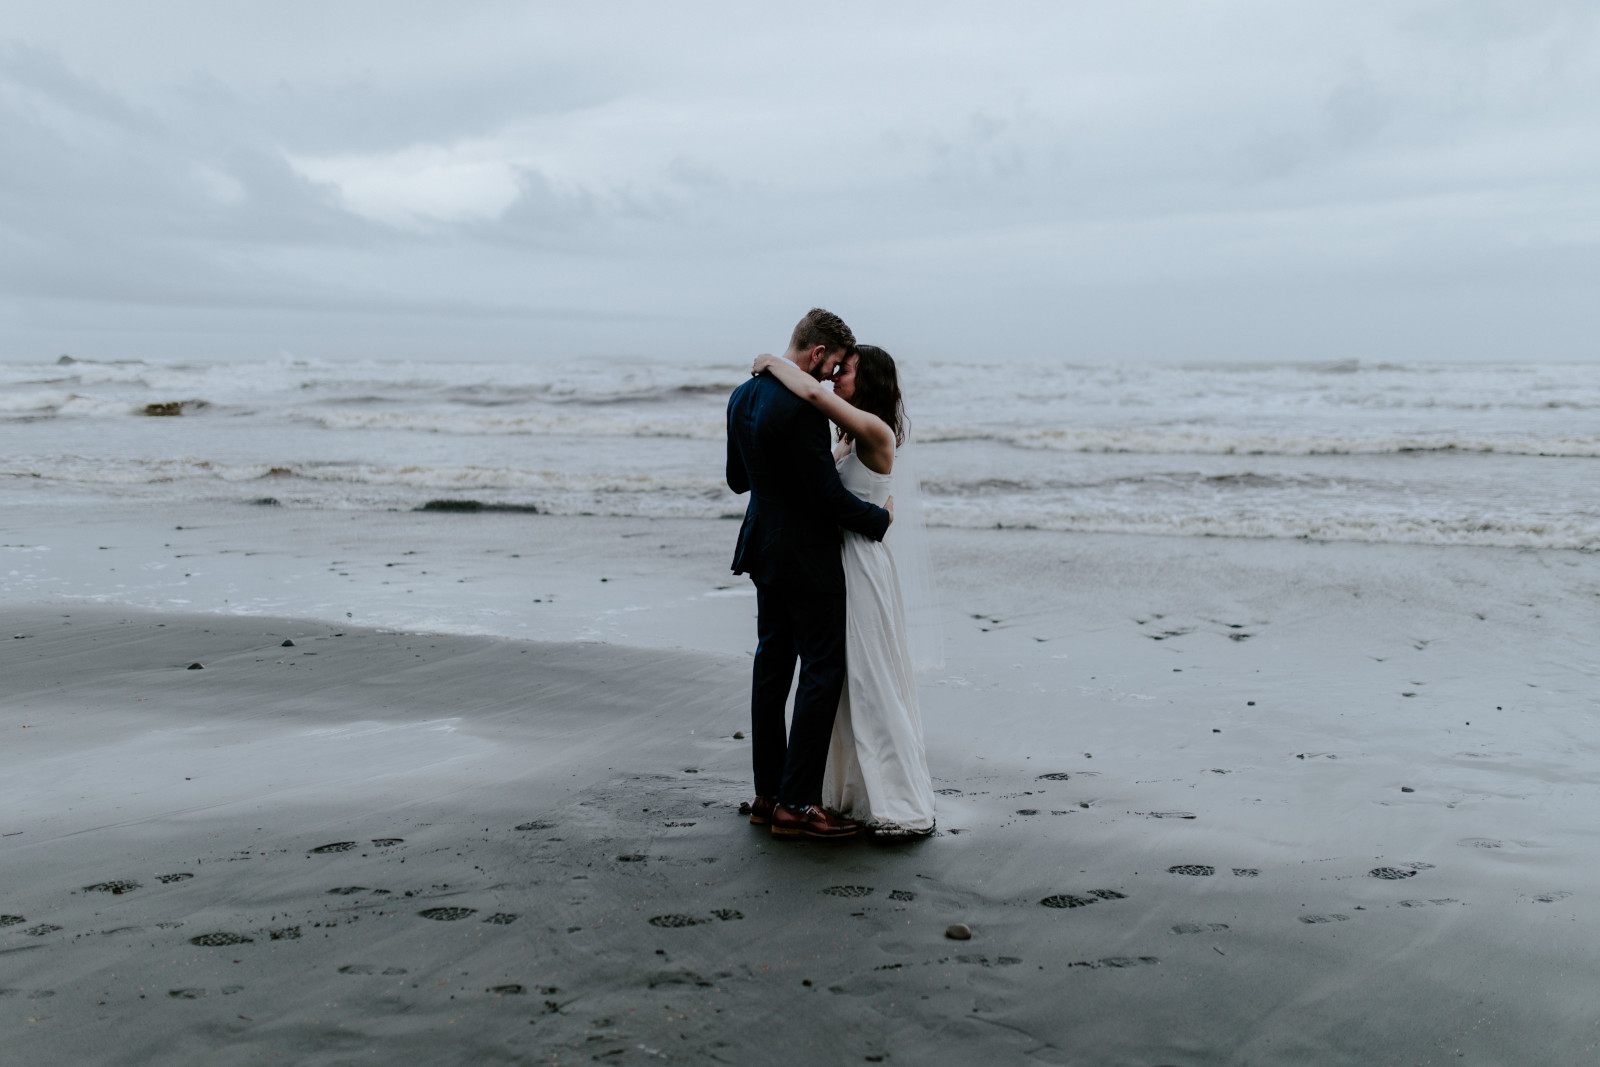 Mollie and Corey dance on the rainy beach. Elopement photography at Olympic National Park by Sienna Plus Josh.